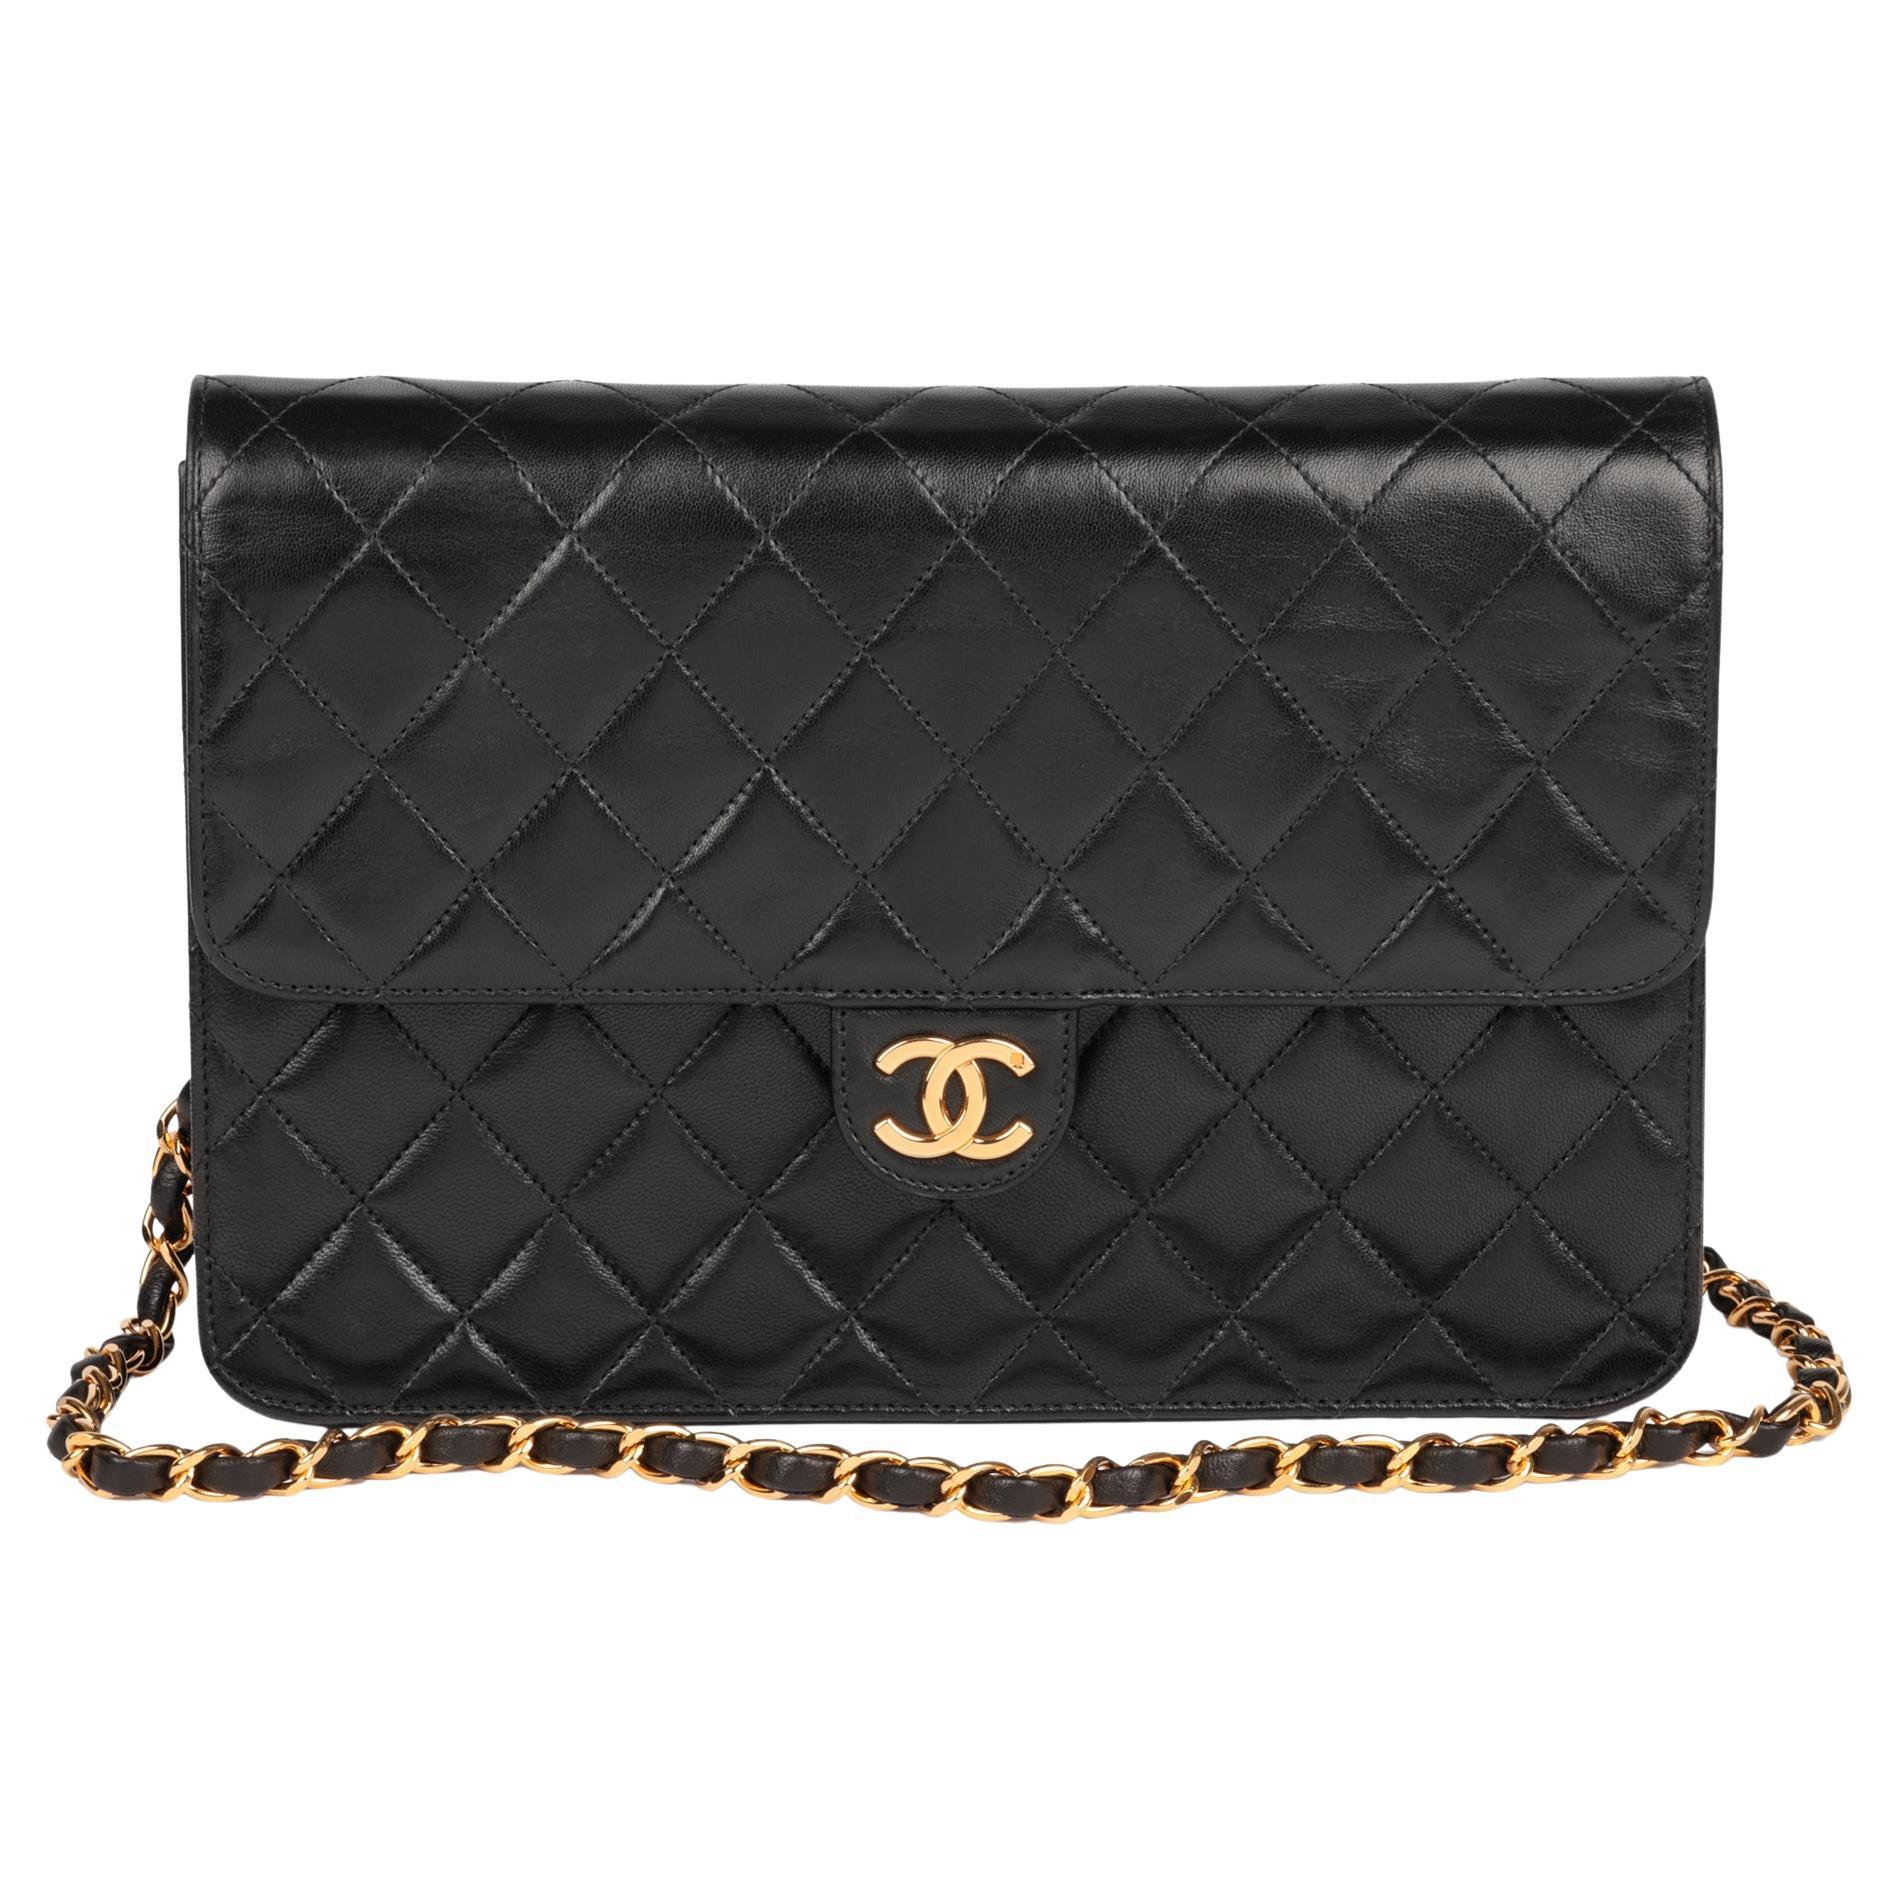 1994 Chanel Black Quilted Lambskin Vintage Mini Flap Bag at